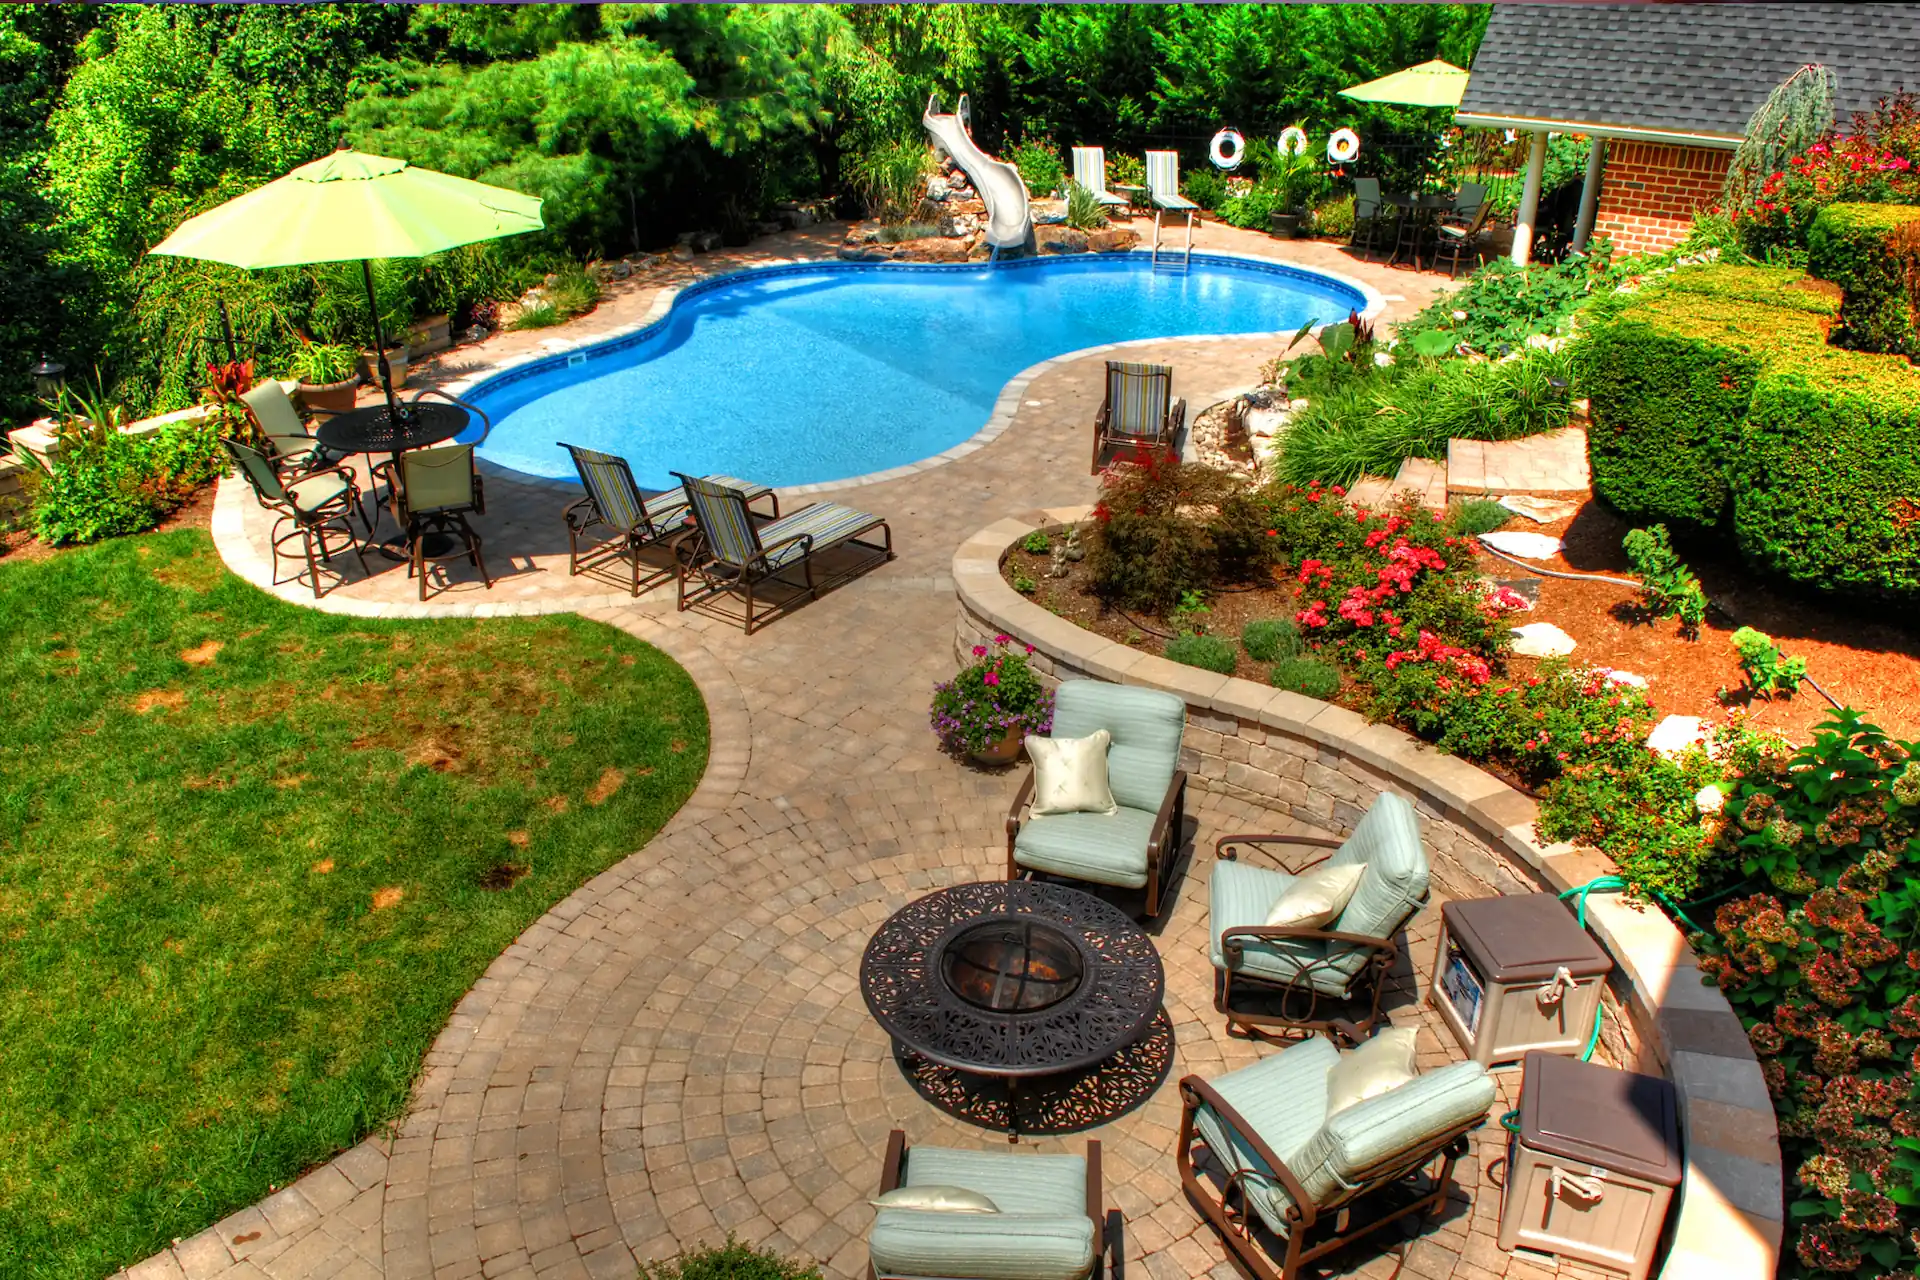 Aerial shot of a backyard with an inground pool surrounded by a bricked pool deck in the daylight. Backyard designs in Central Pennsylvania can include swimming pools and fire pits like those pictured here.